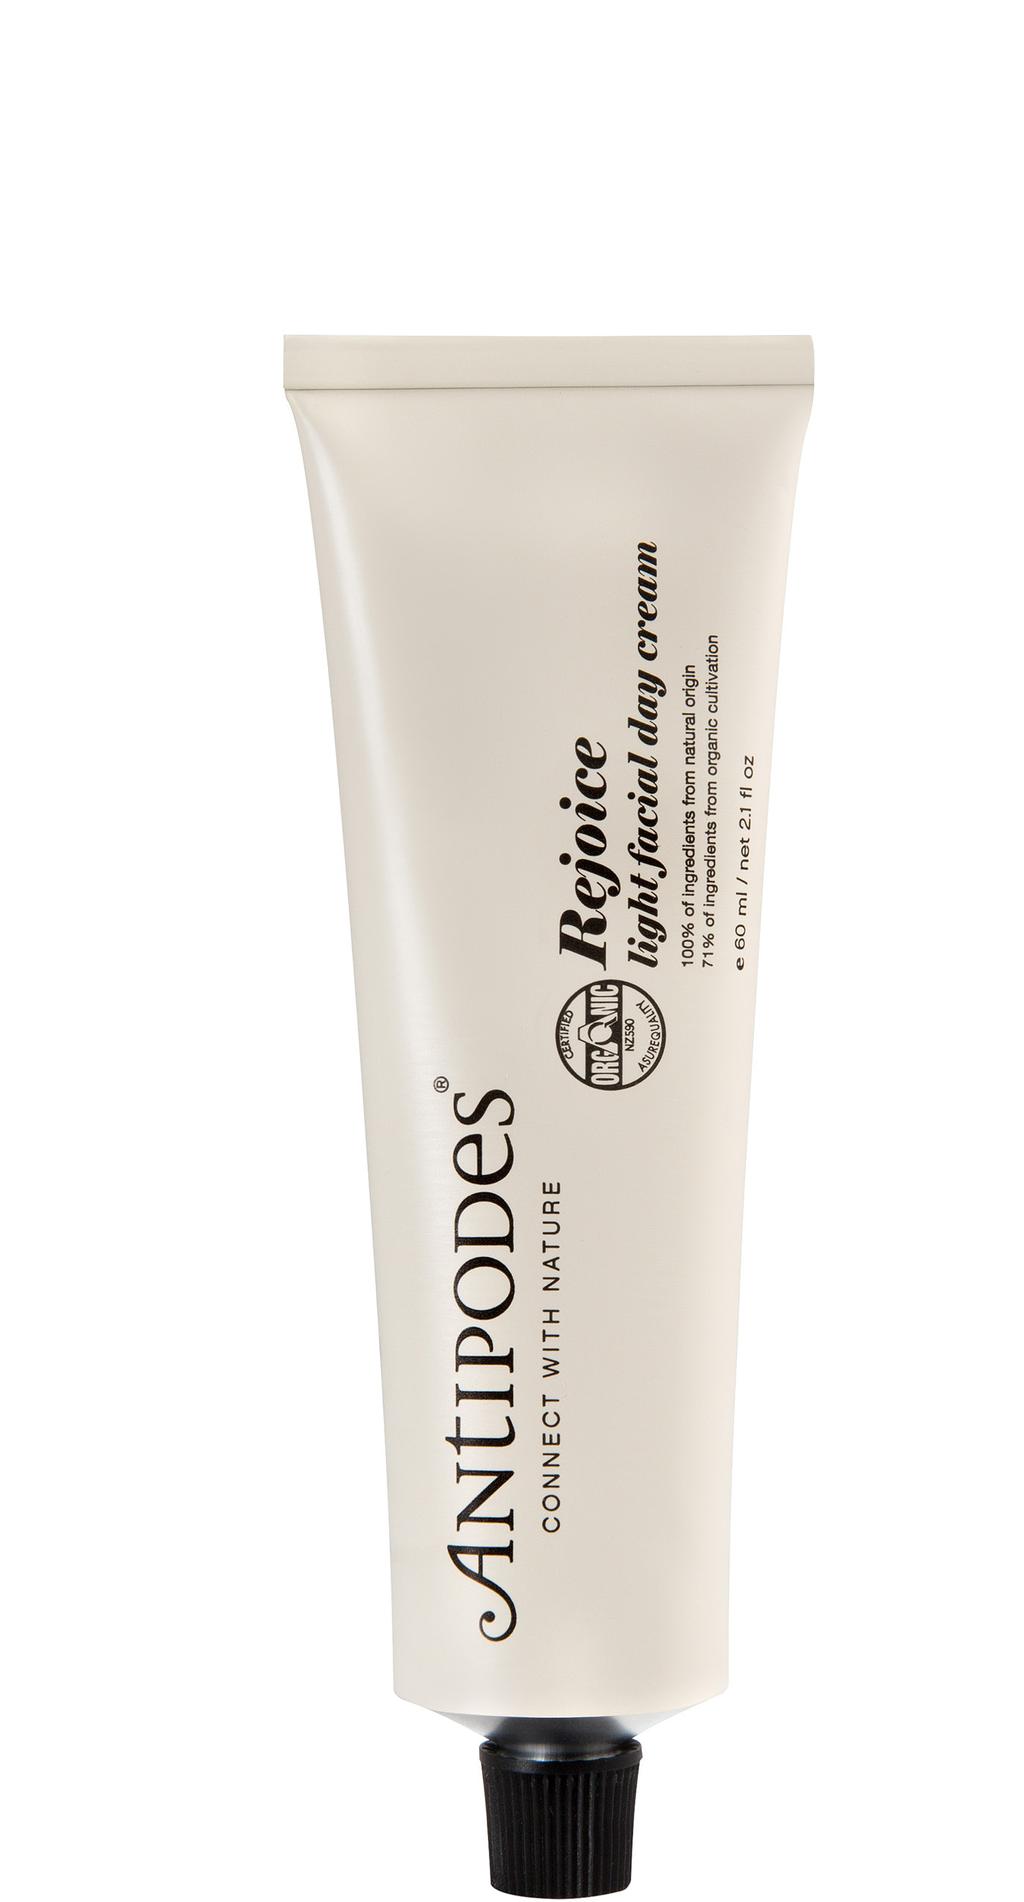 REJOICE LIGHT FACIAL DAY CREAM 60ML A gentle, light and non-oily facial day cream to enhance your skin s natural hydration. Extraordinary collagen-boosting powers of avocado oil soften and regenerate.